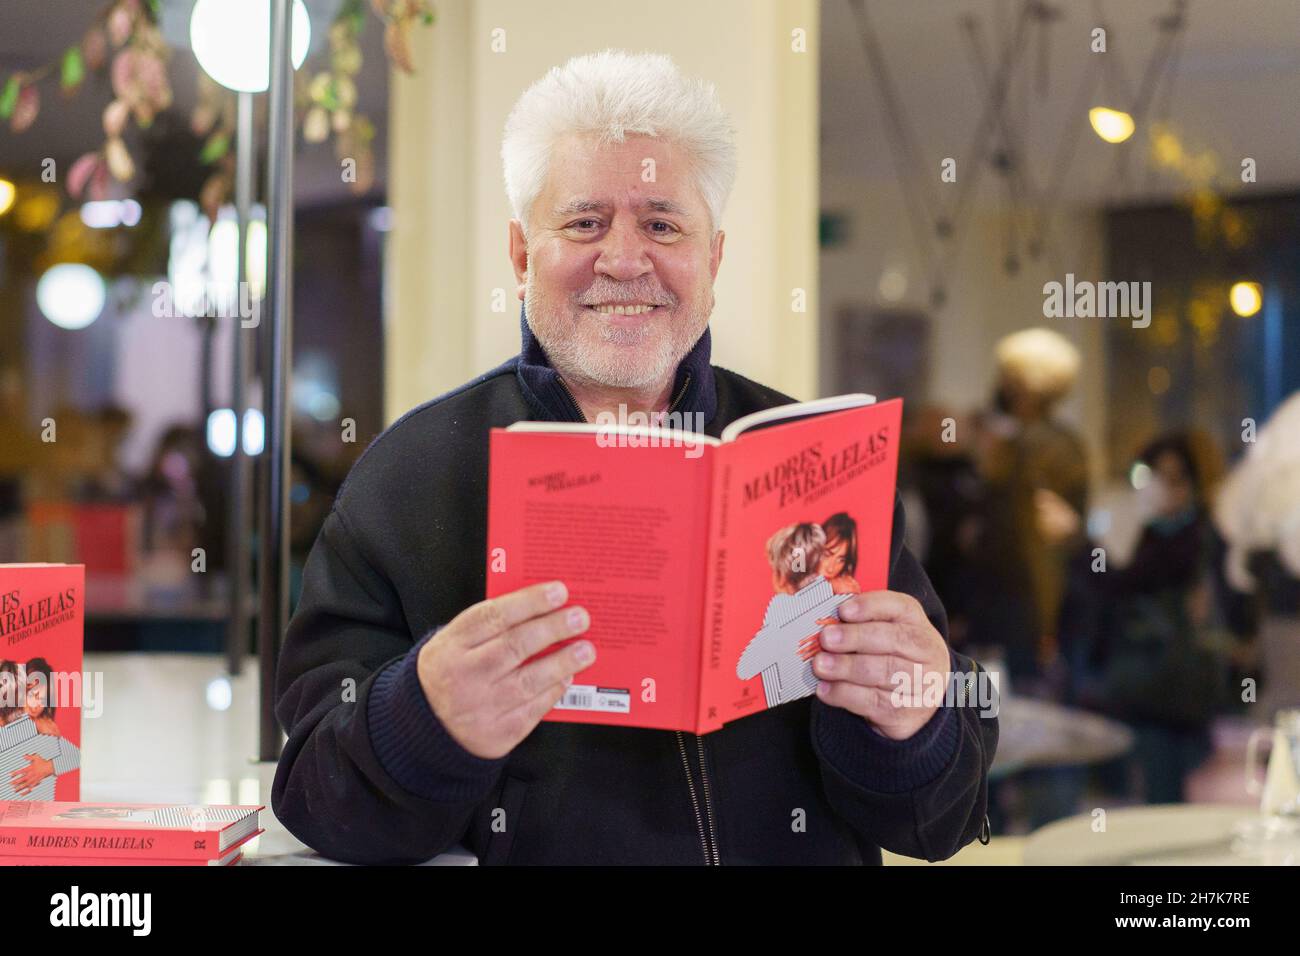 Madrid, Spain. 23rd Nov, 2021. Spanish director, Pedro Almodovar at the 'Parallel Mothers' presentation, a book for his film at the DAMA foundation. Credit: SOPA Images Limited/Alamy Live News Stock Photo